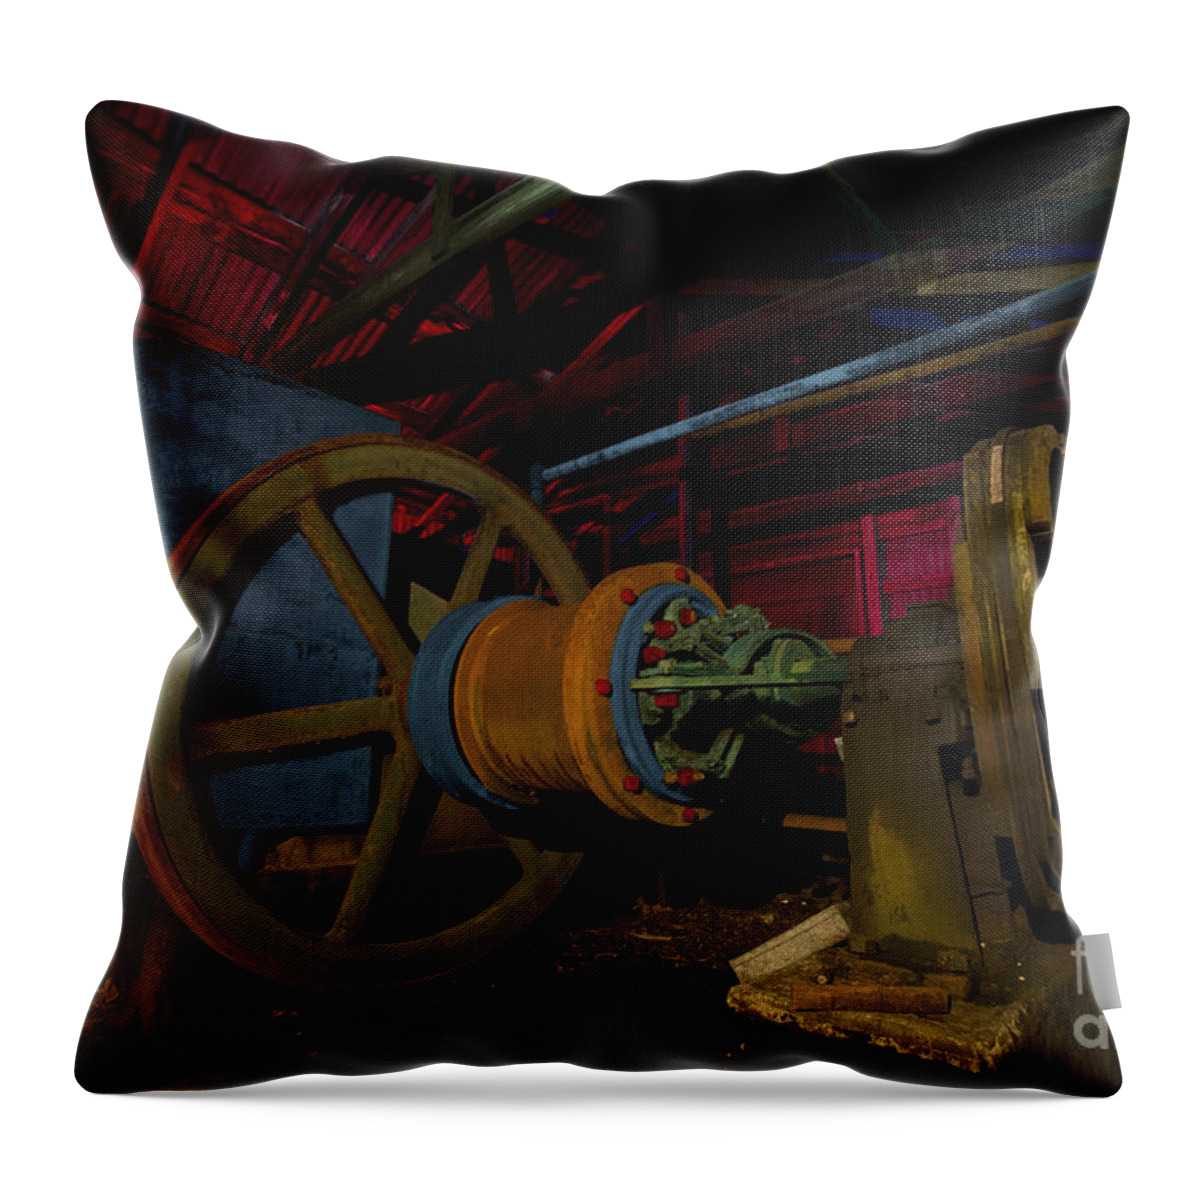 35 Hp Superior Oilfield Engine Throw Pillow featuring the photograph 1920 Superior oilfield engine pump house by Keith Kapple